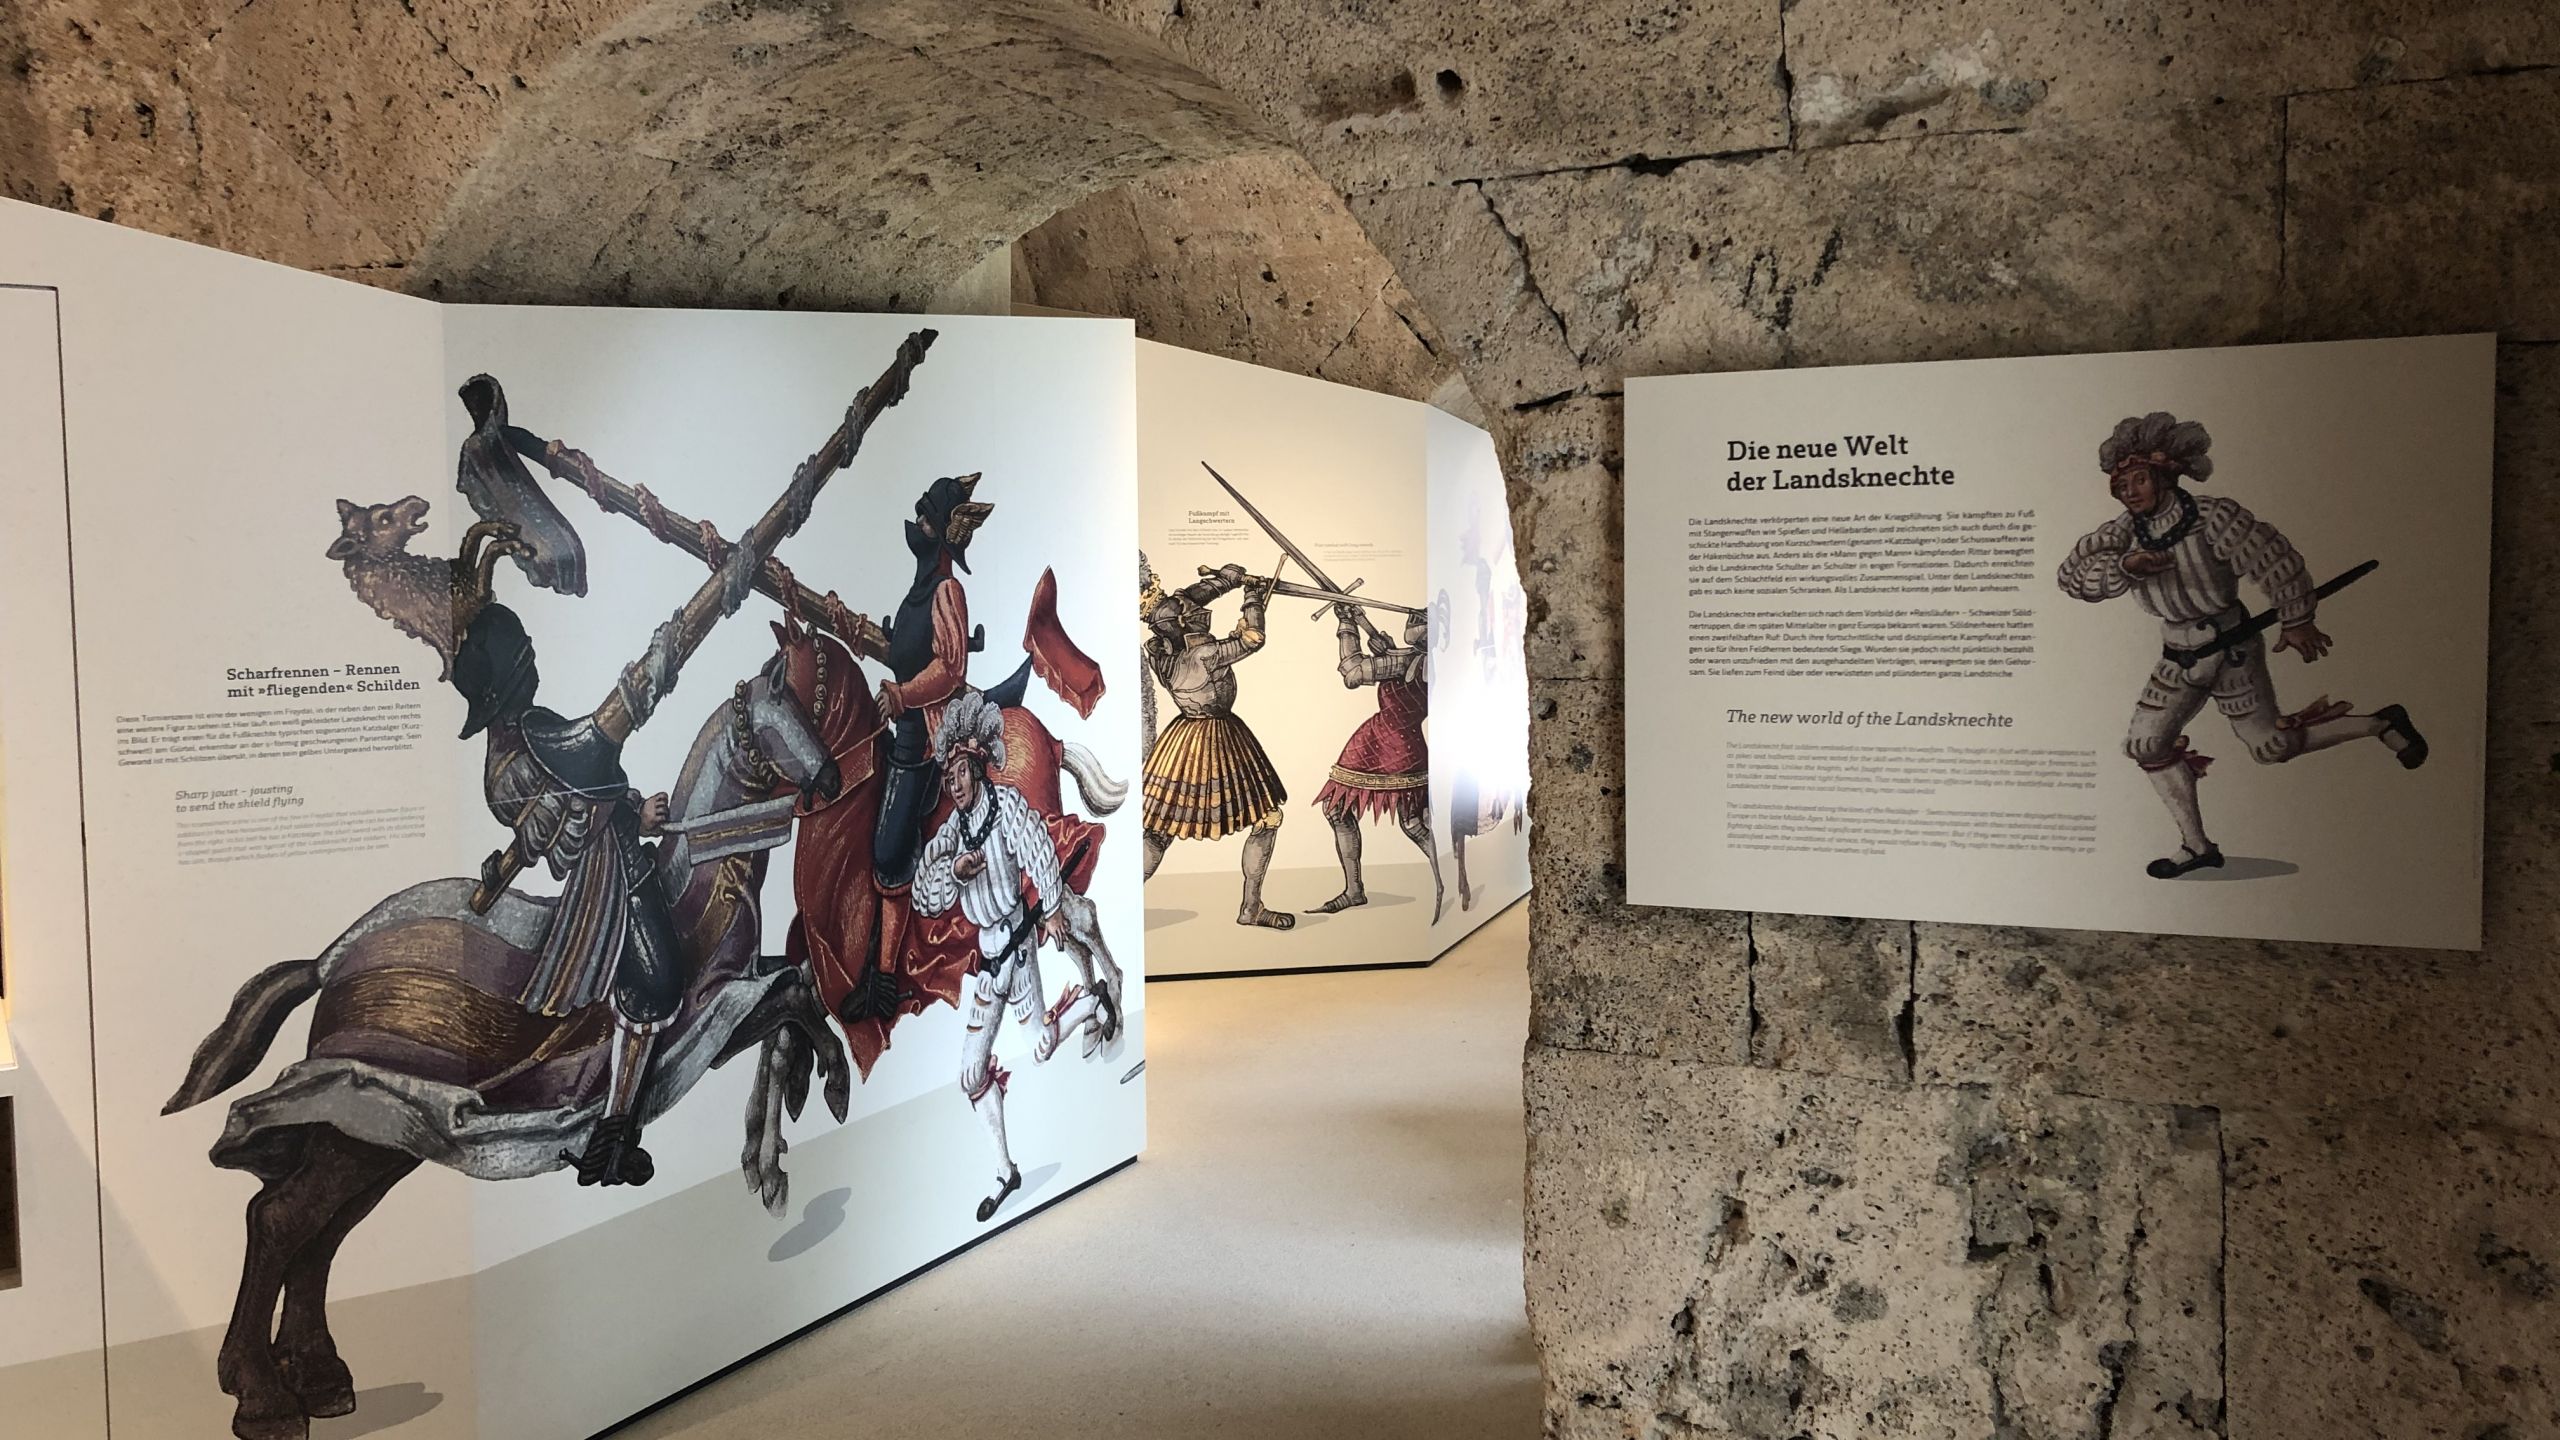 Kufstein Fortress - “Knightly idealism and foot soldier reality”